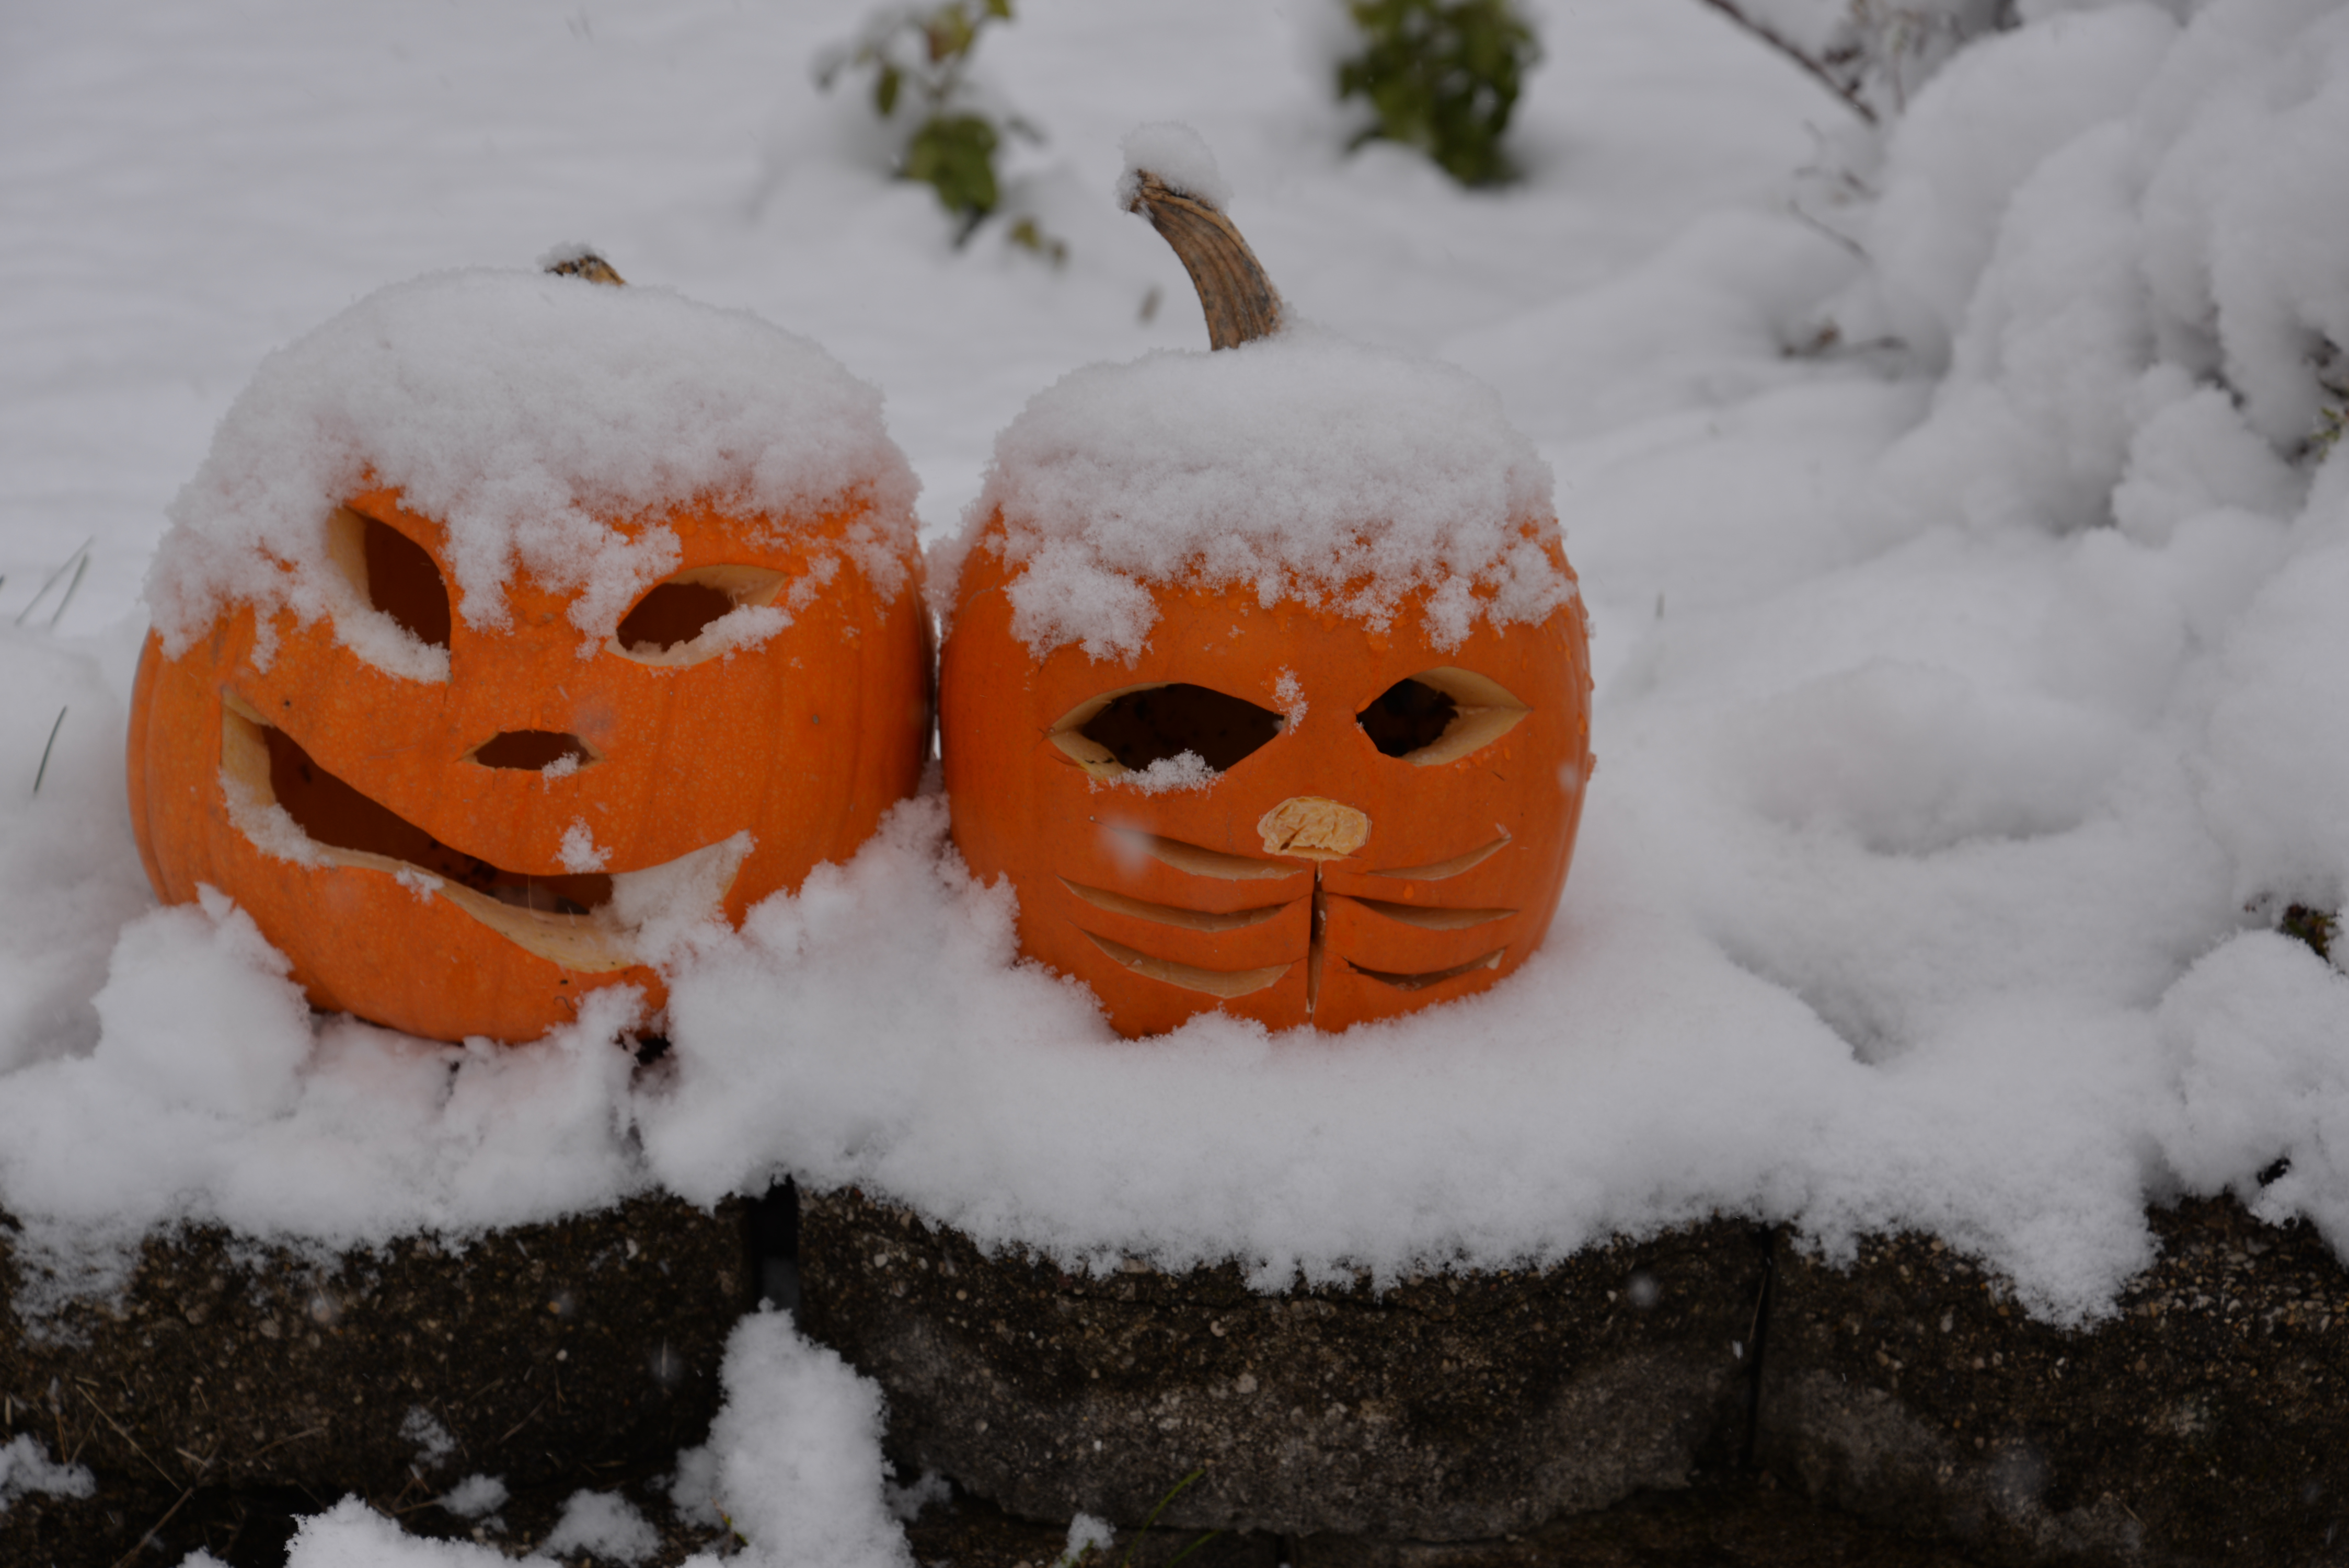 Snow for Halloween in Chicago area